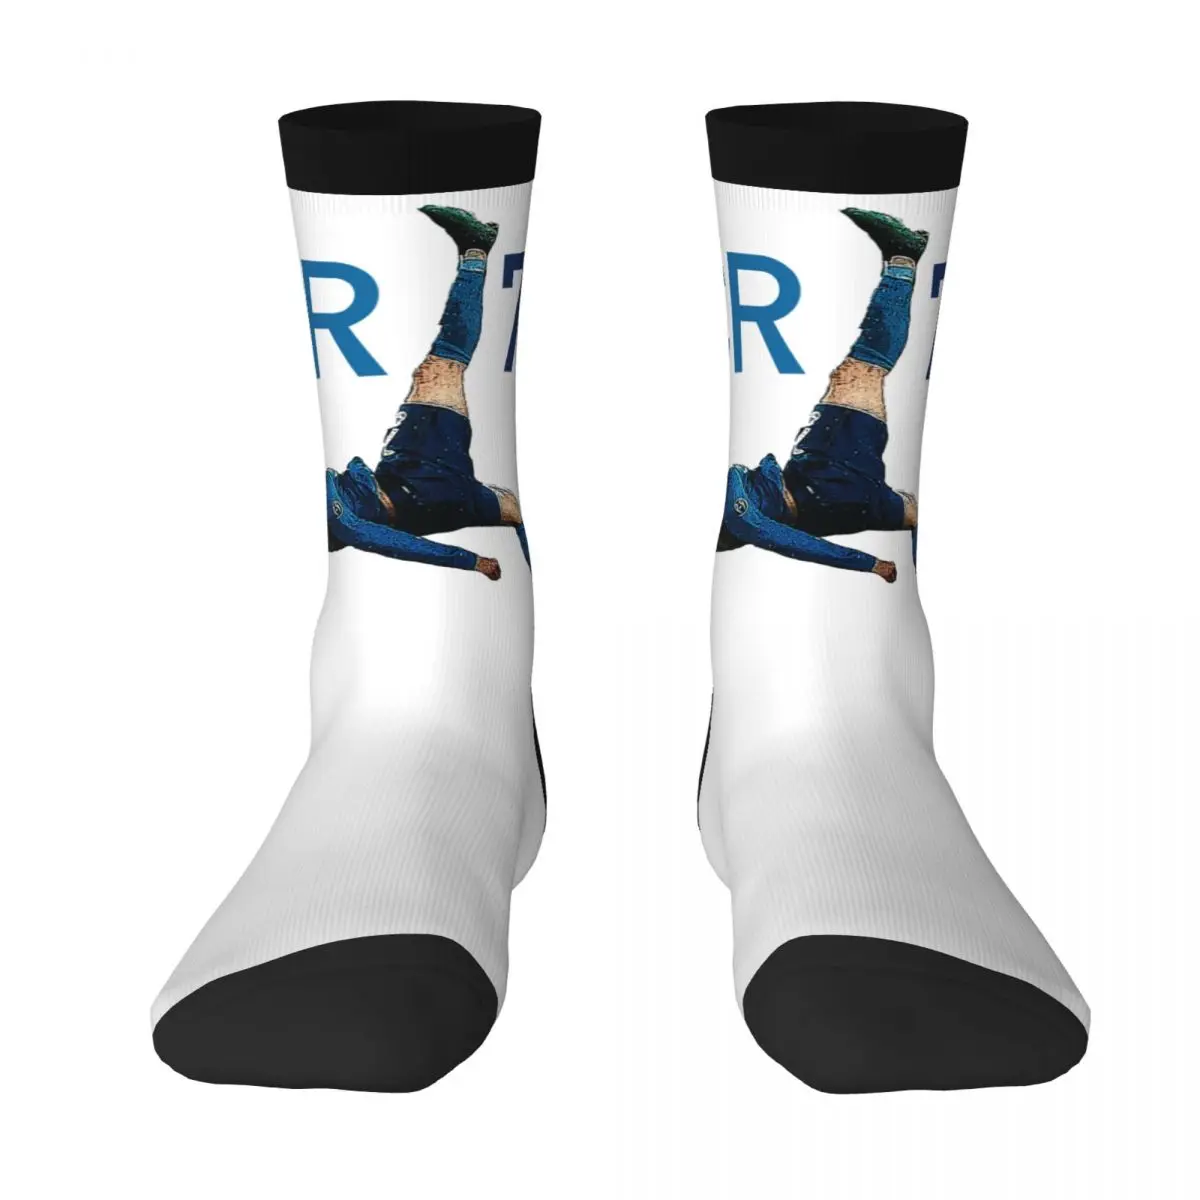 

Classic Brazil (2) Cristianoes And Ronaldoes Football Team Stocking BEST TO BUY Field pack Compression SocksGraphic